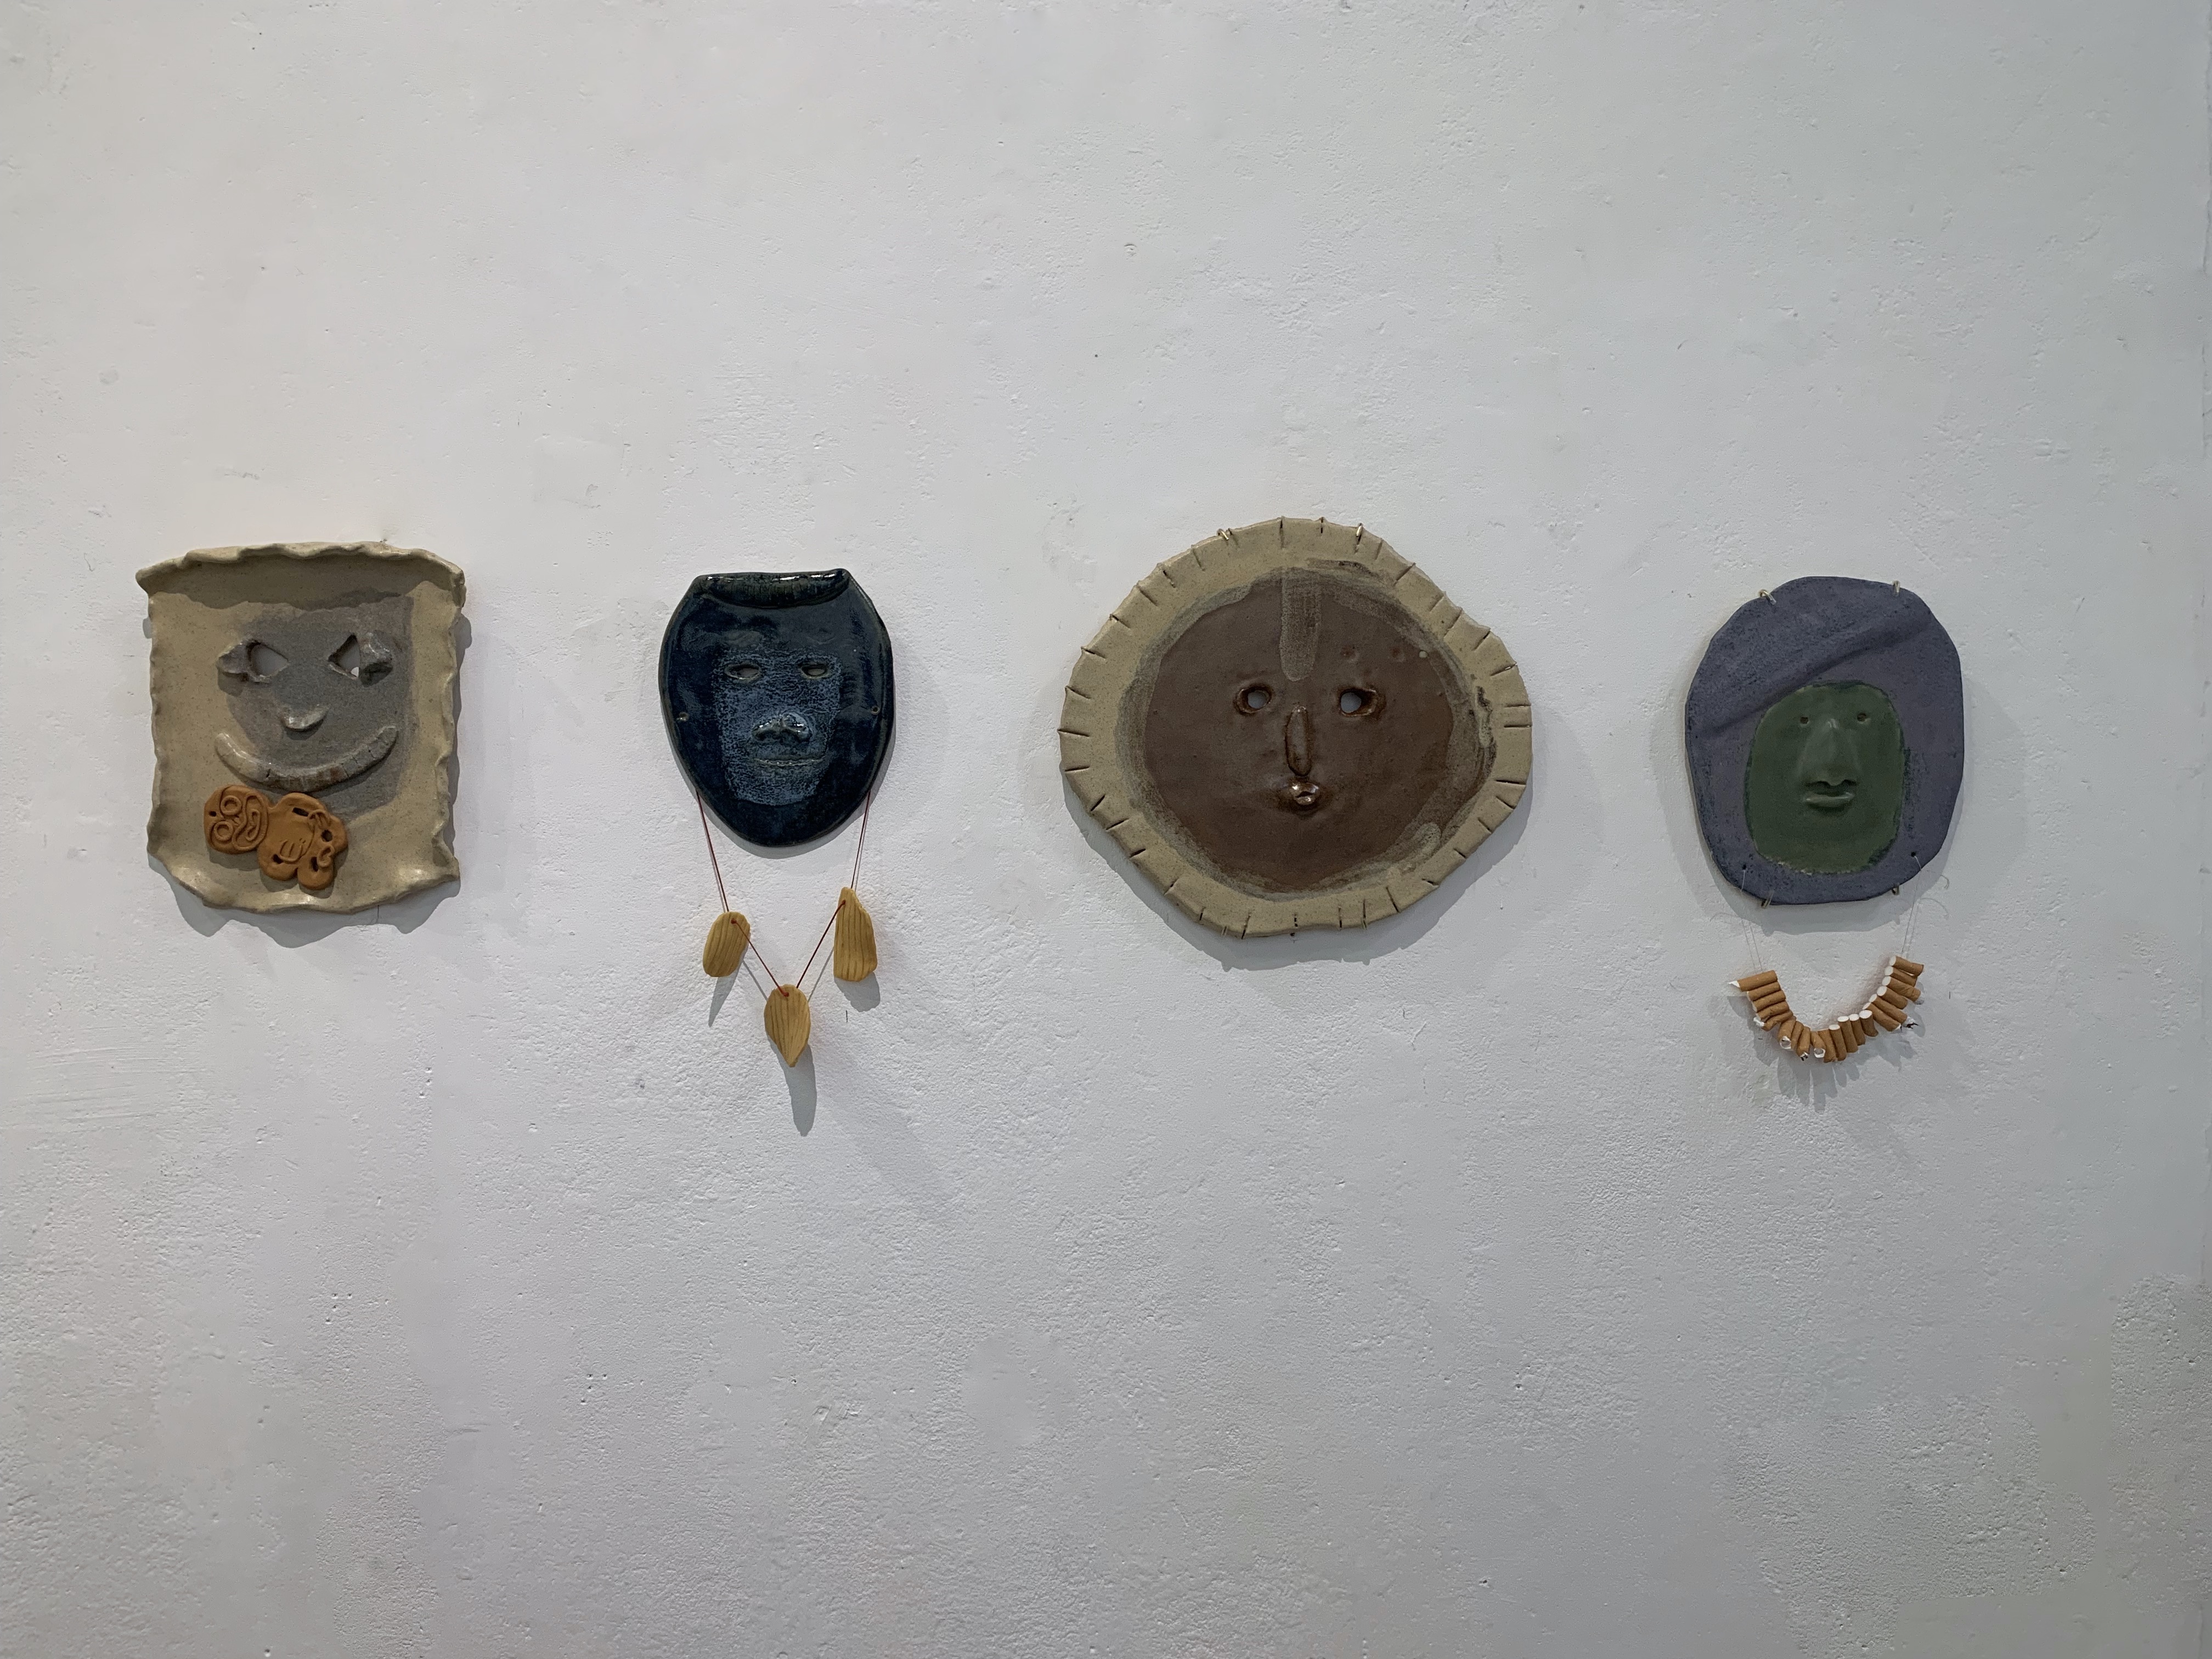 Group of sculptures by Rachel Walters - Glazed stoneware, modelling material, cigarettes and twine